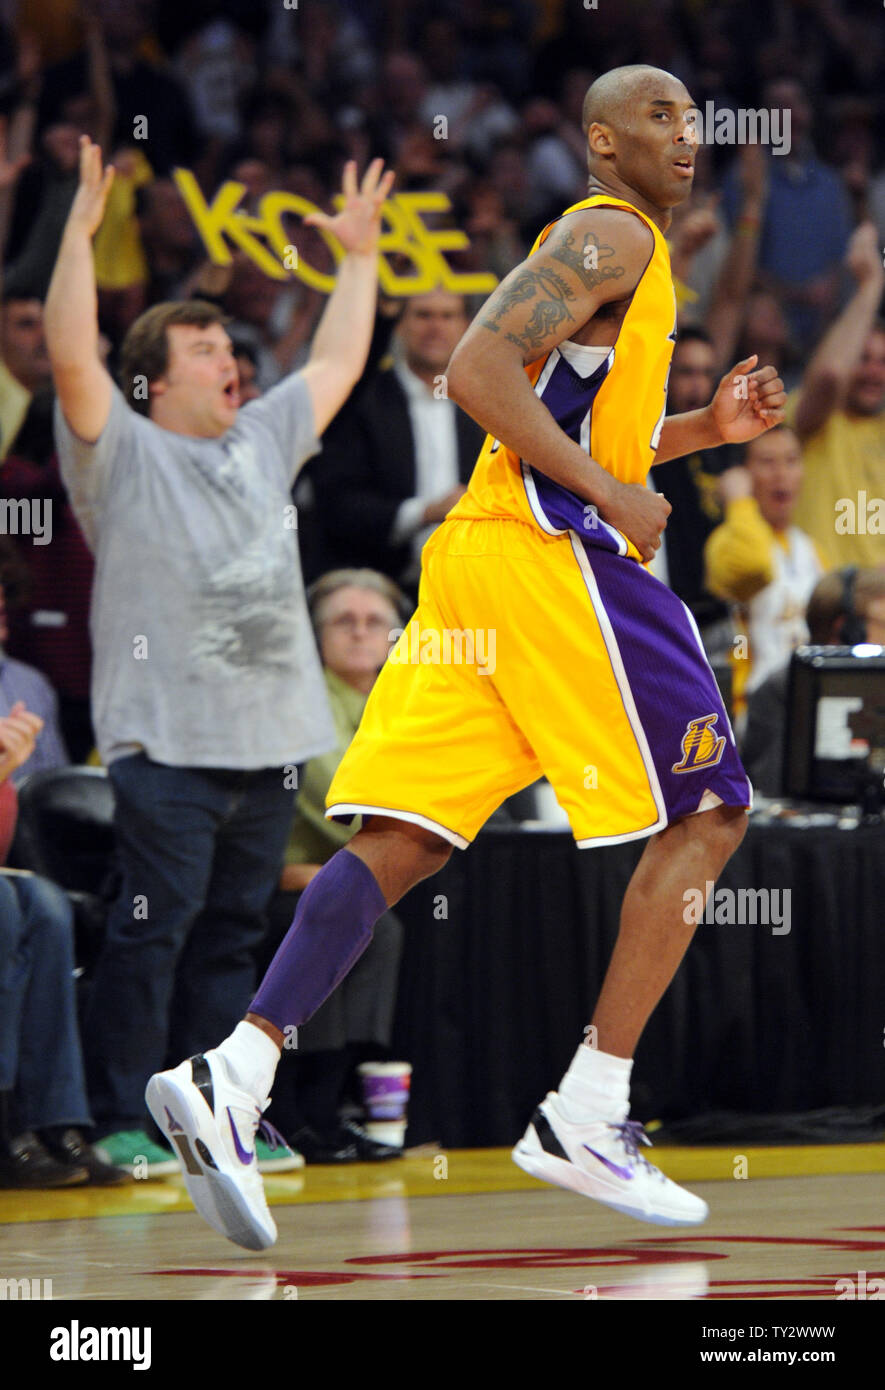 Los Angeles Lakers shooting guard Kobe Bryant (24) makes a 3 point basket during the second half of game 5 of the Western Conference Playoffs against the Denver Nuggets at Staples Center in Los Angeles on May 8, 2012. Actor Jack Black celebrates court side. The Nuggets won 102-99. UPI /Lori Shepler Stock Photo